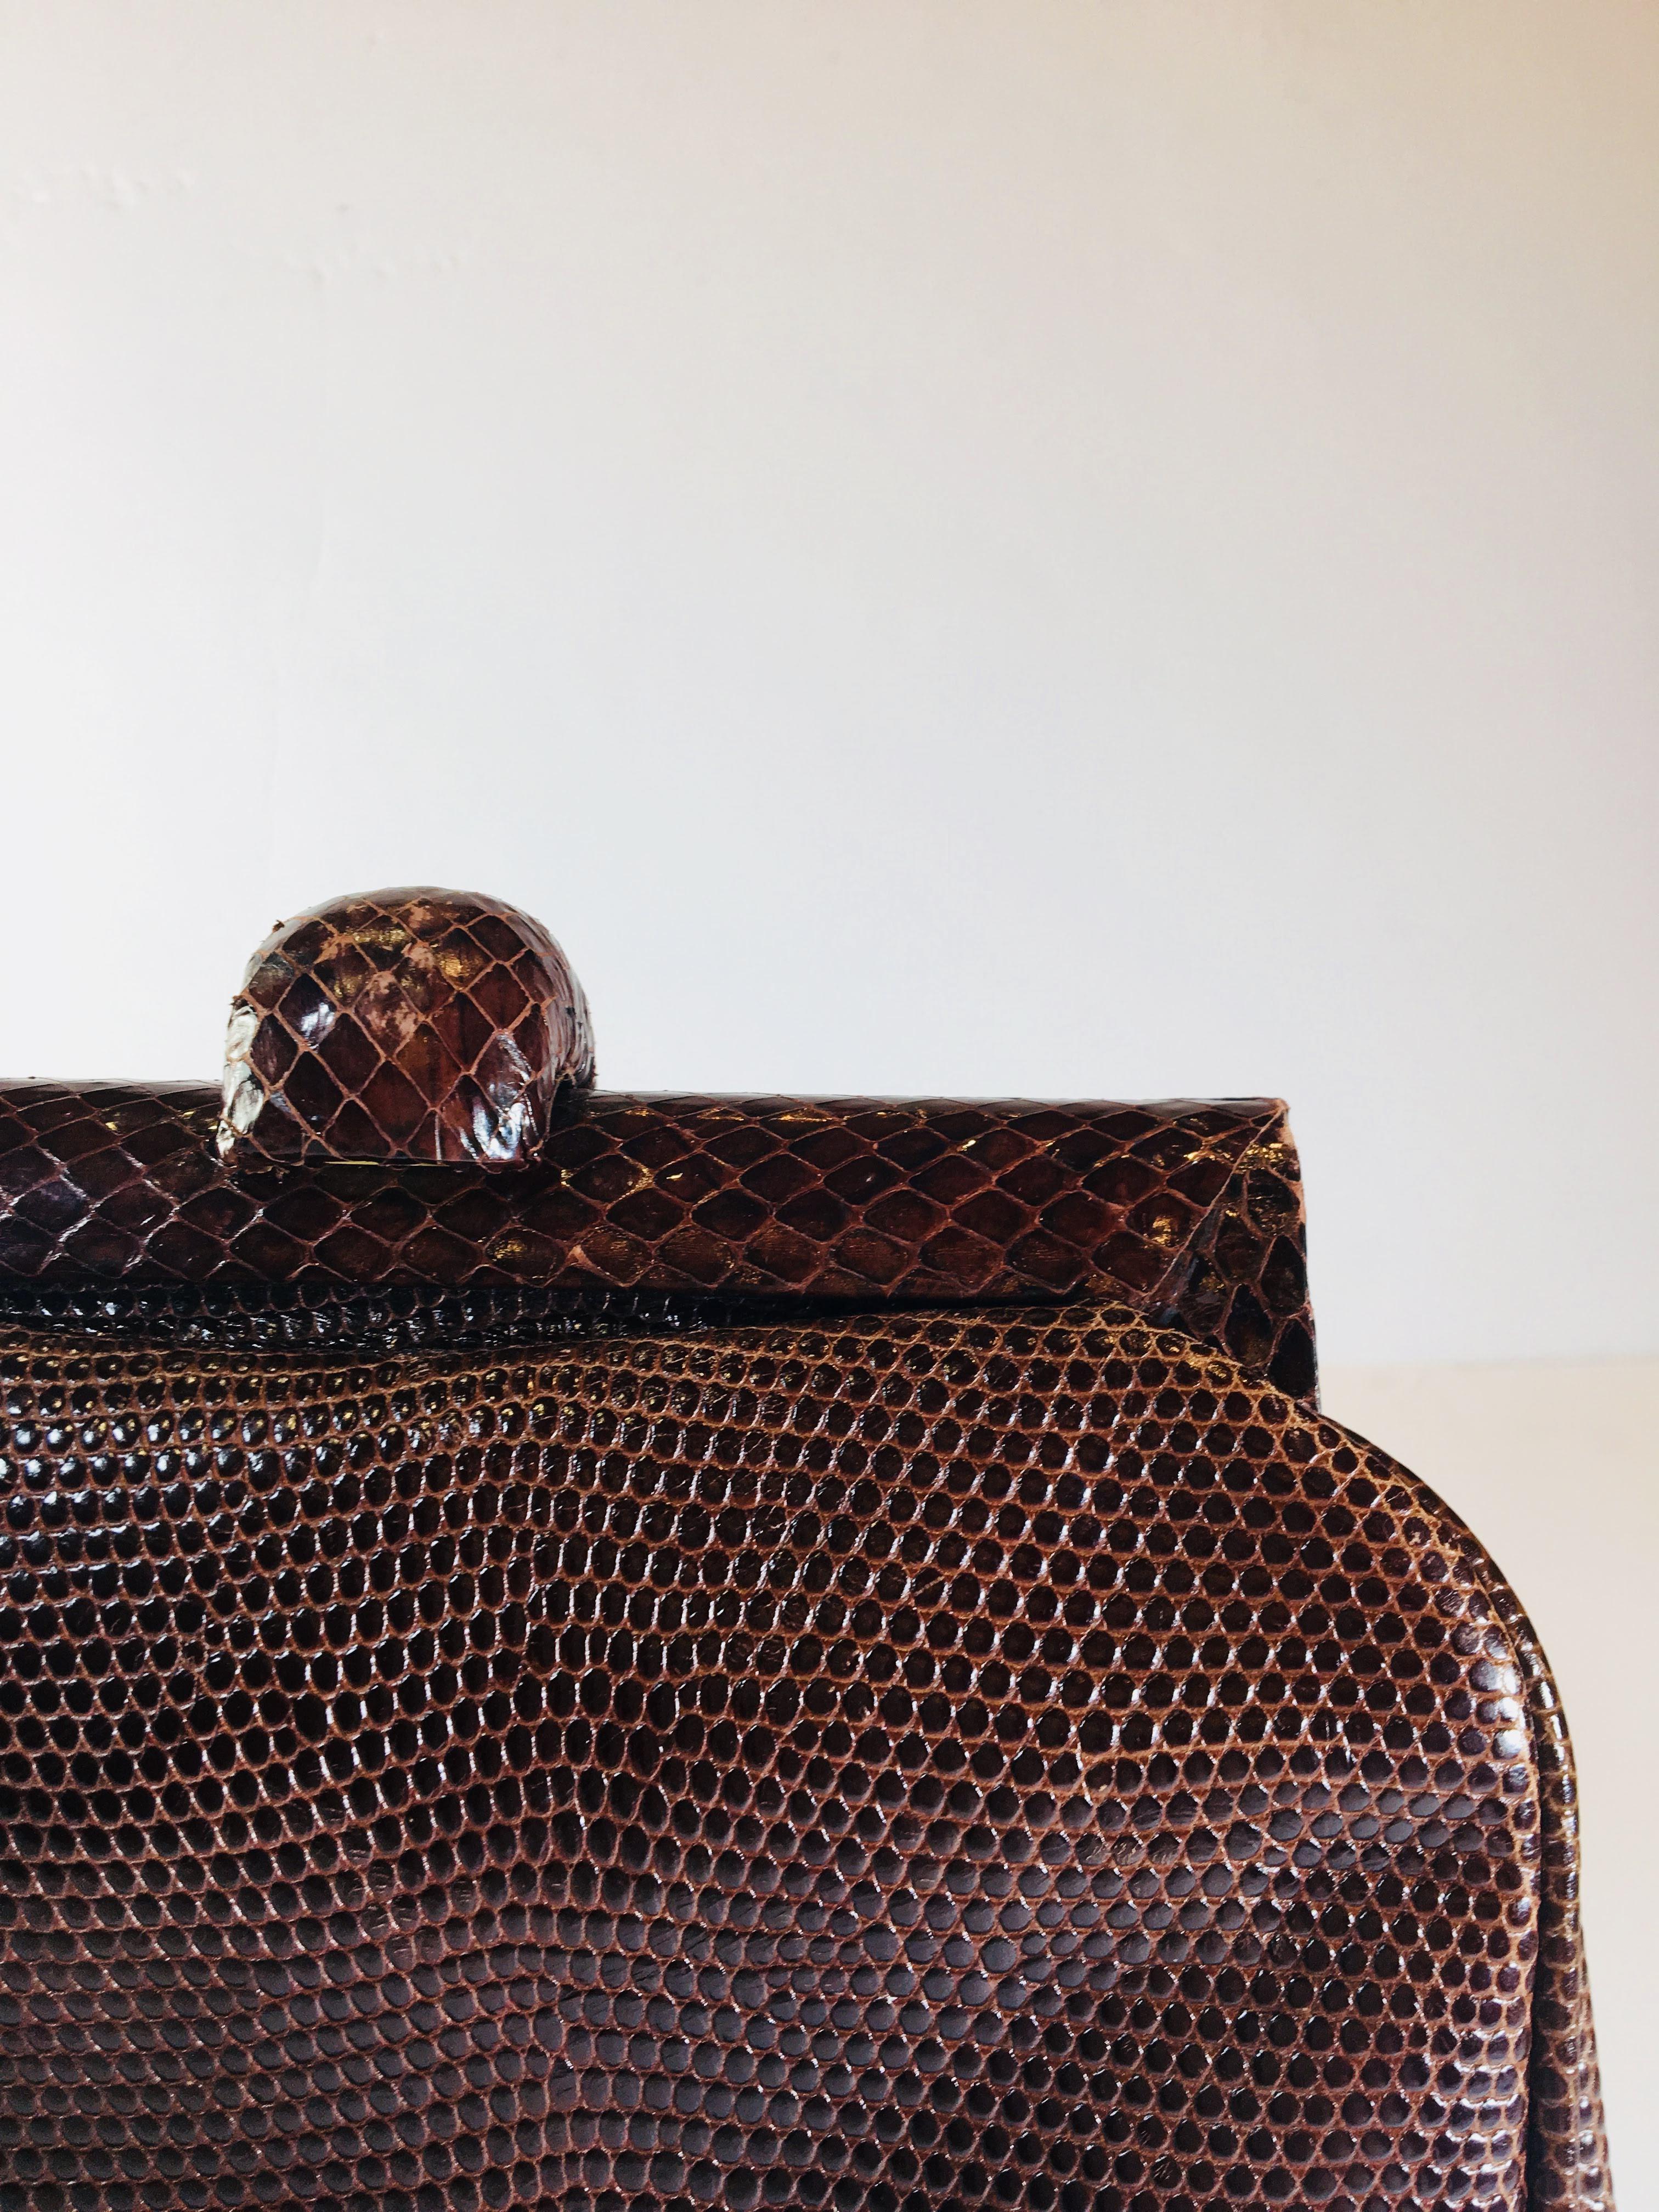 Chocolate Brown Embossed Leather Clutch with Python Skin Detail 
10